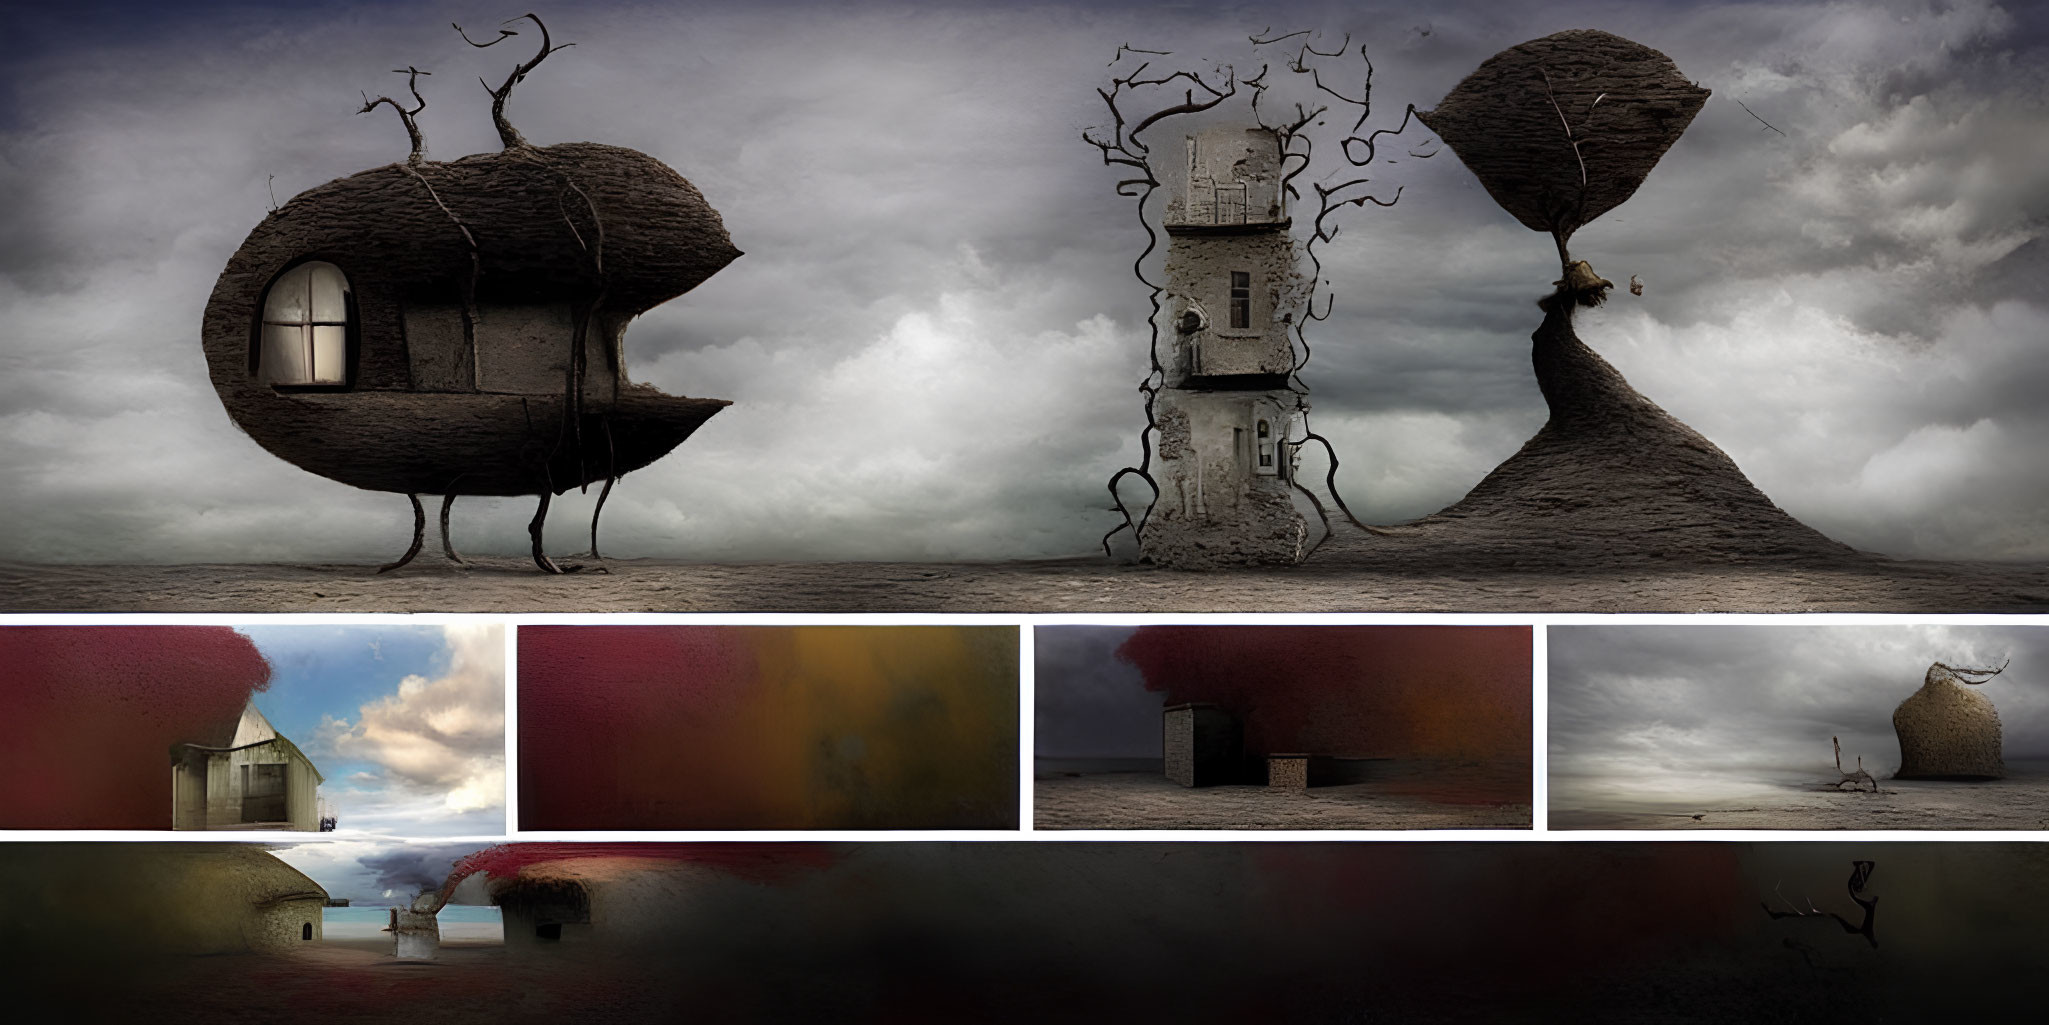 Surreal Landscape Featuring Tree-Like Structures, Tower with Branches, and Buildings Against Cloudy